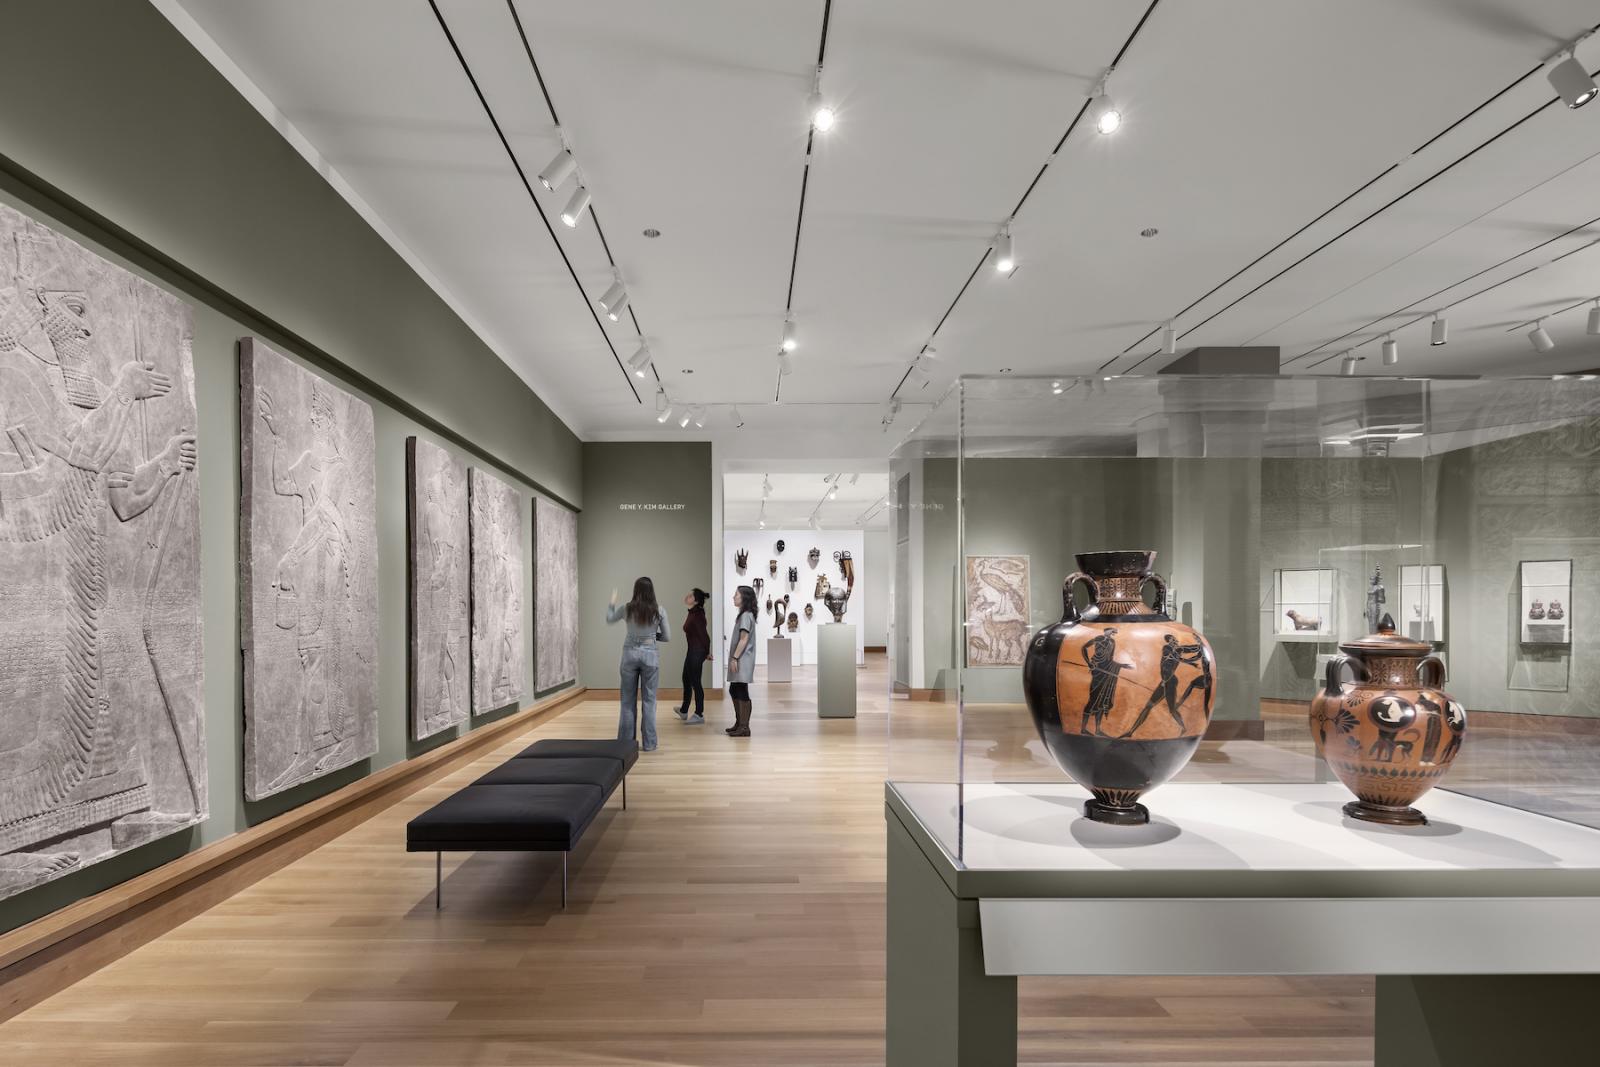 Ancient art on display in the new Hood Museum galleries.